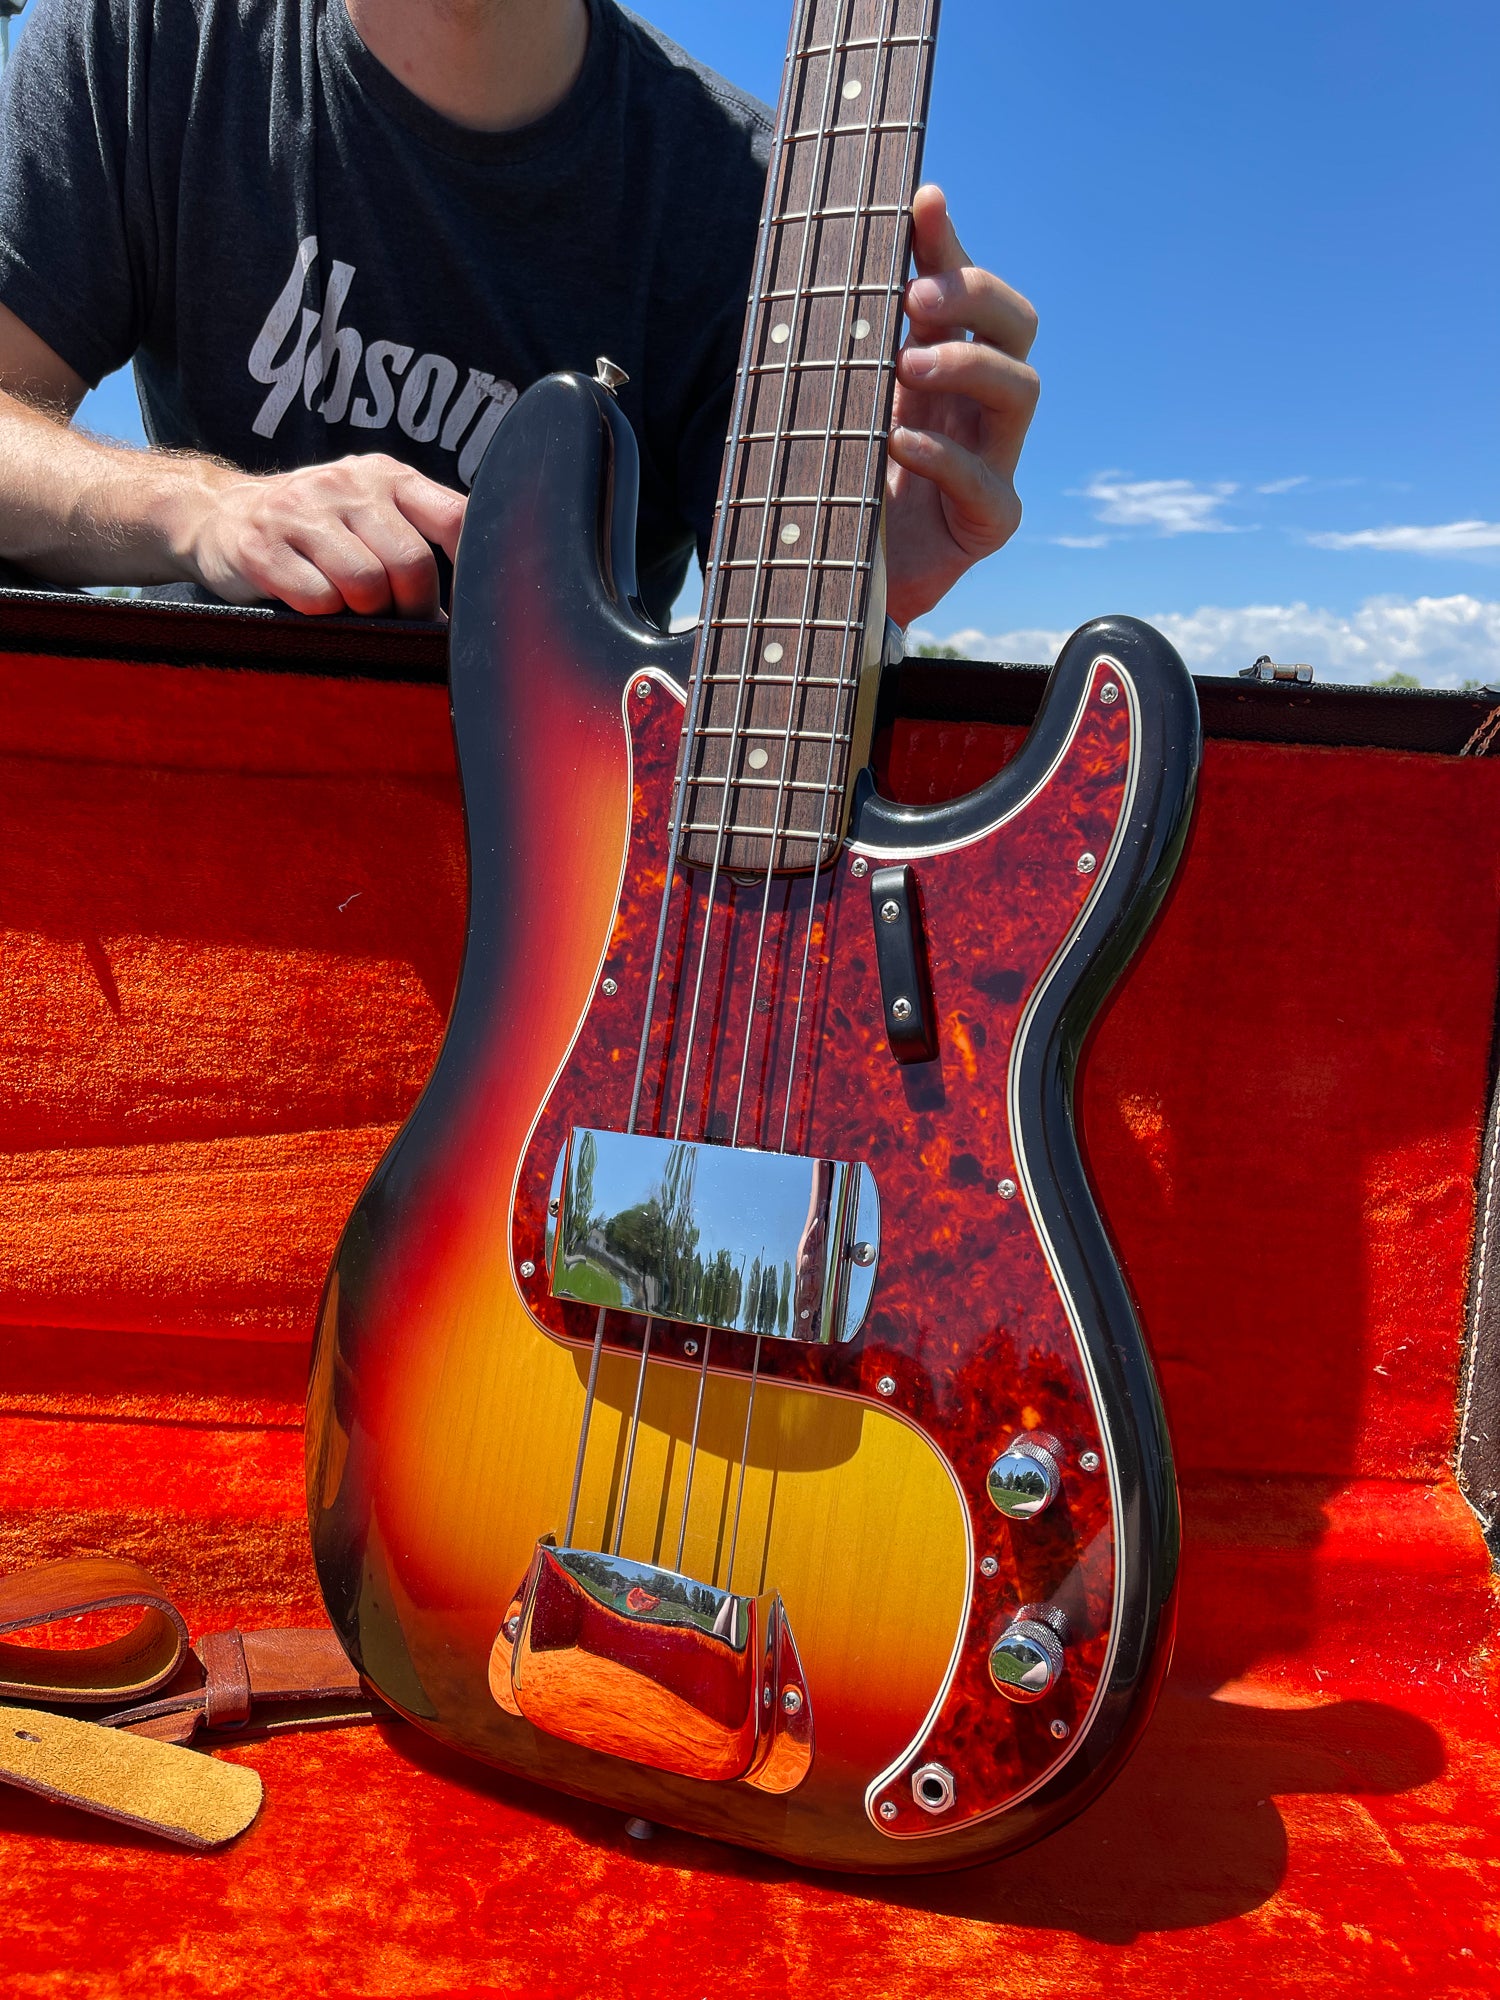 1966 Fender Precision Bass in a guitar collection